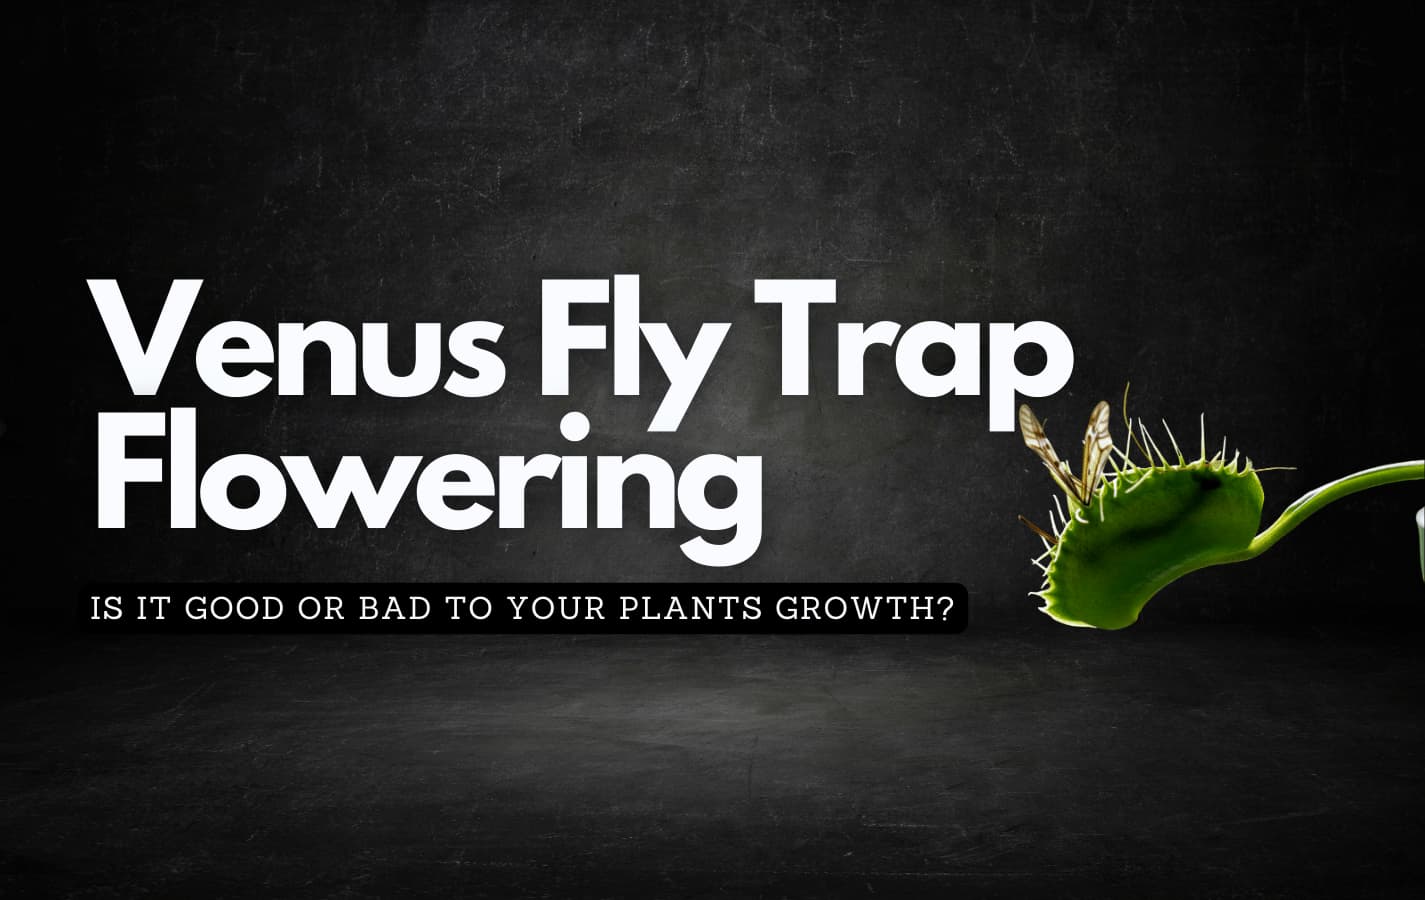 Stunning Venus Fly Trap Flowers: Facts You Need to Know